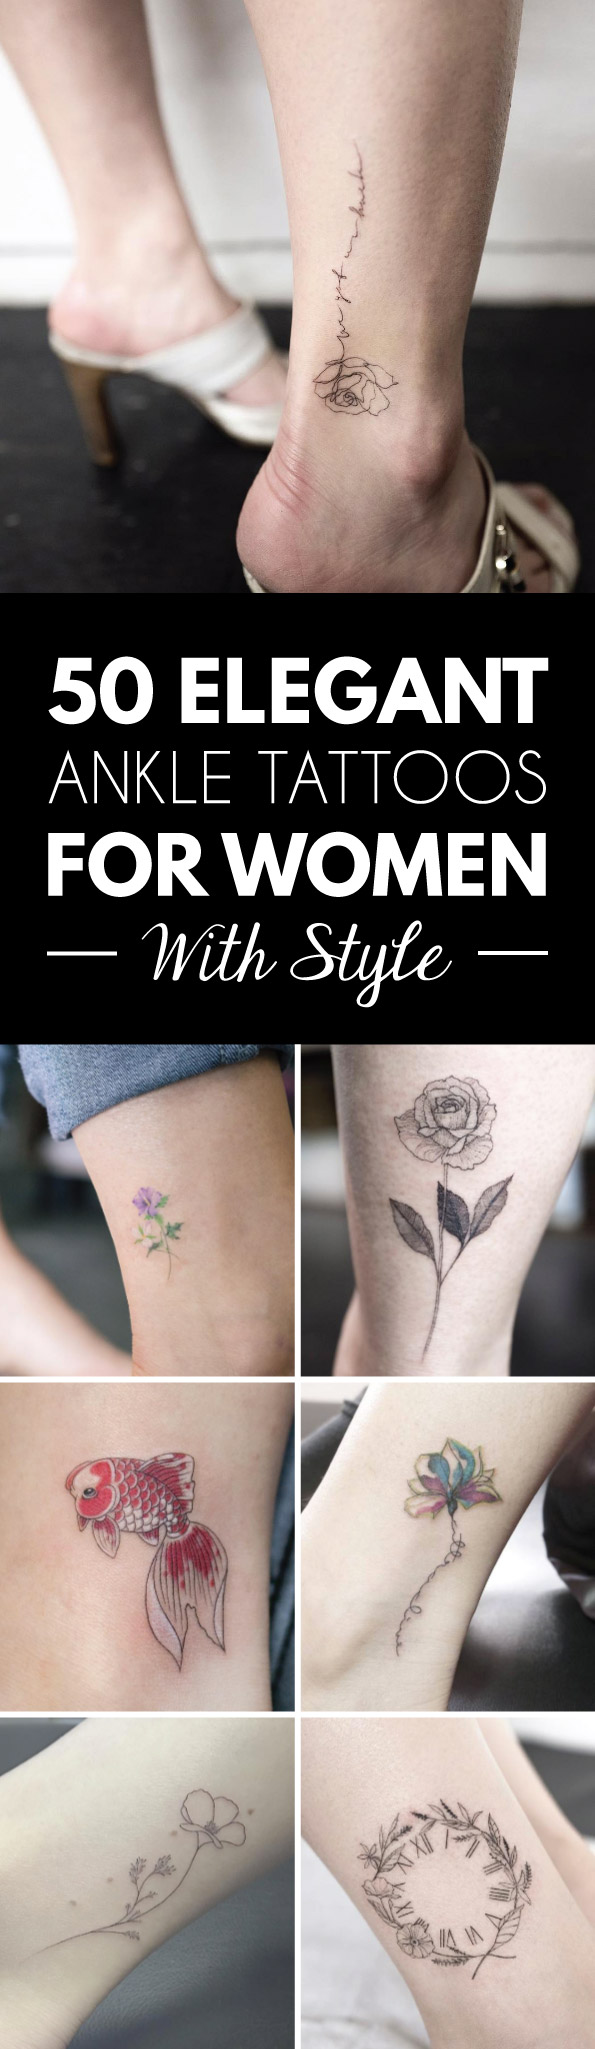 50 Elegant Ankle Tattoos for Women With Style | TattooBlend